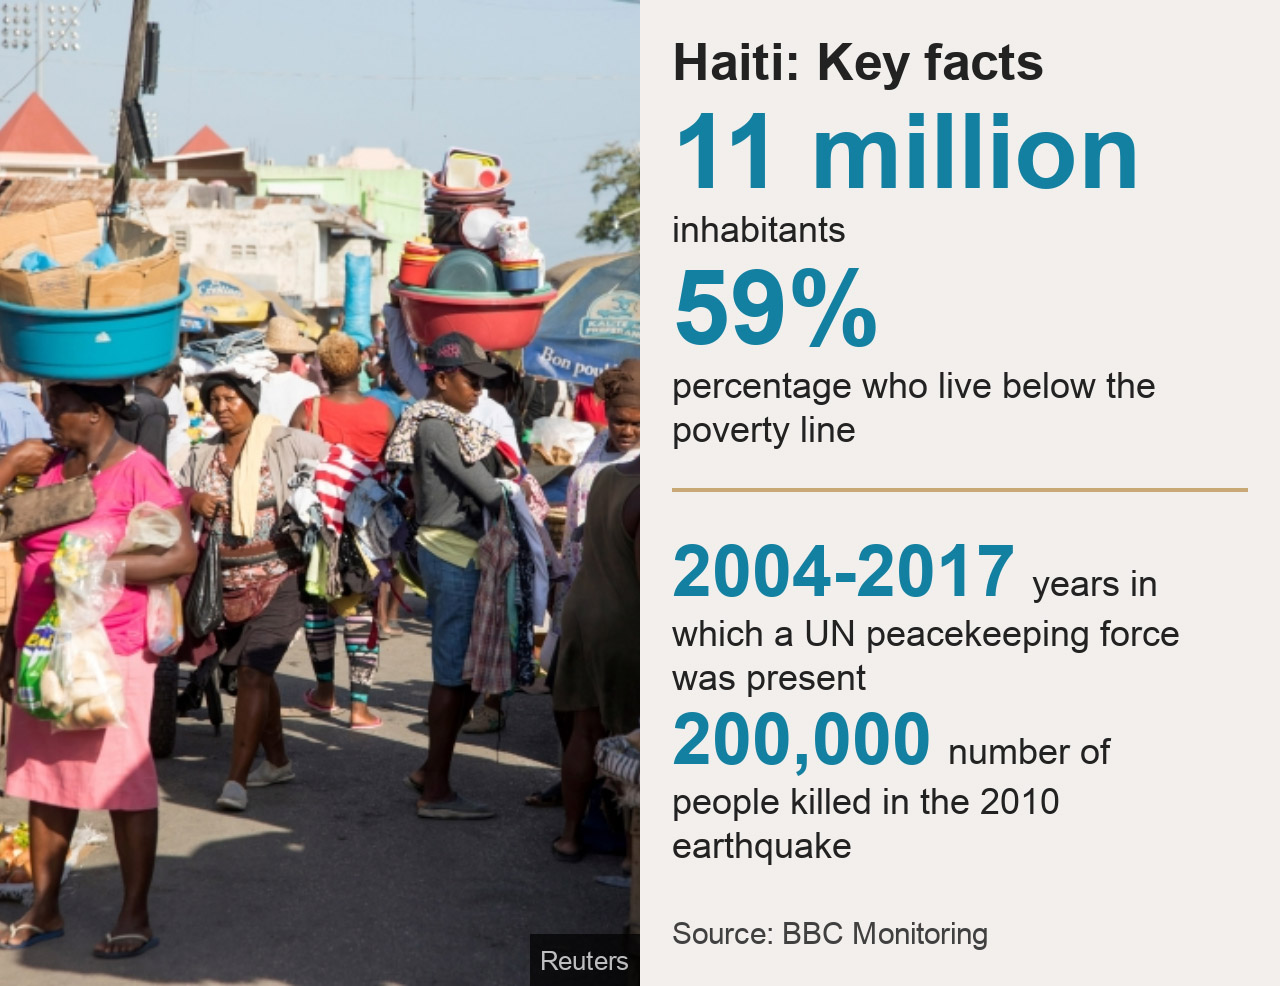 Haiti: Key facts. 11 million inhabitants, 59% percentage who live below the poverty line, 2004–2017 years in which a UN peacekeeping force was present, 200,000 number of people killed in the 2010 earthquake.